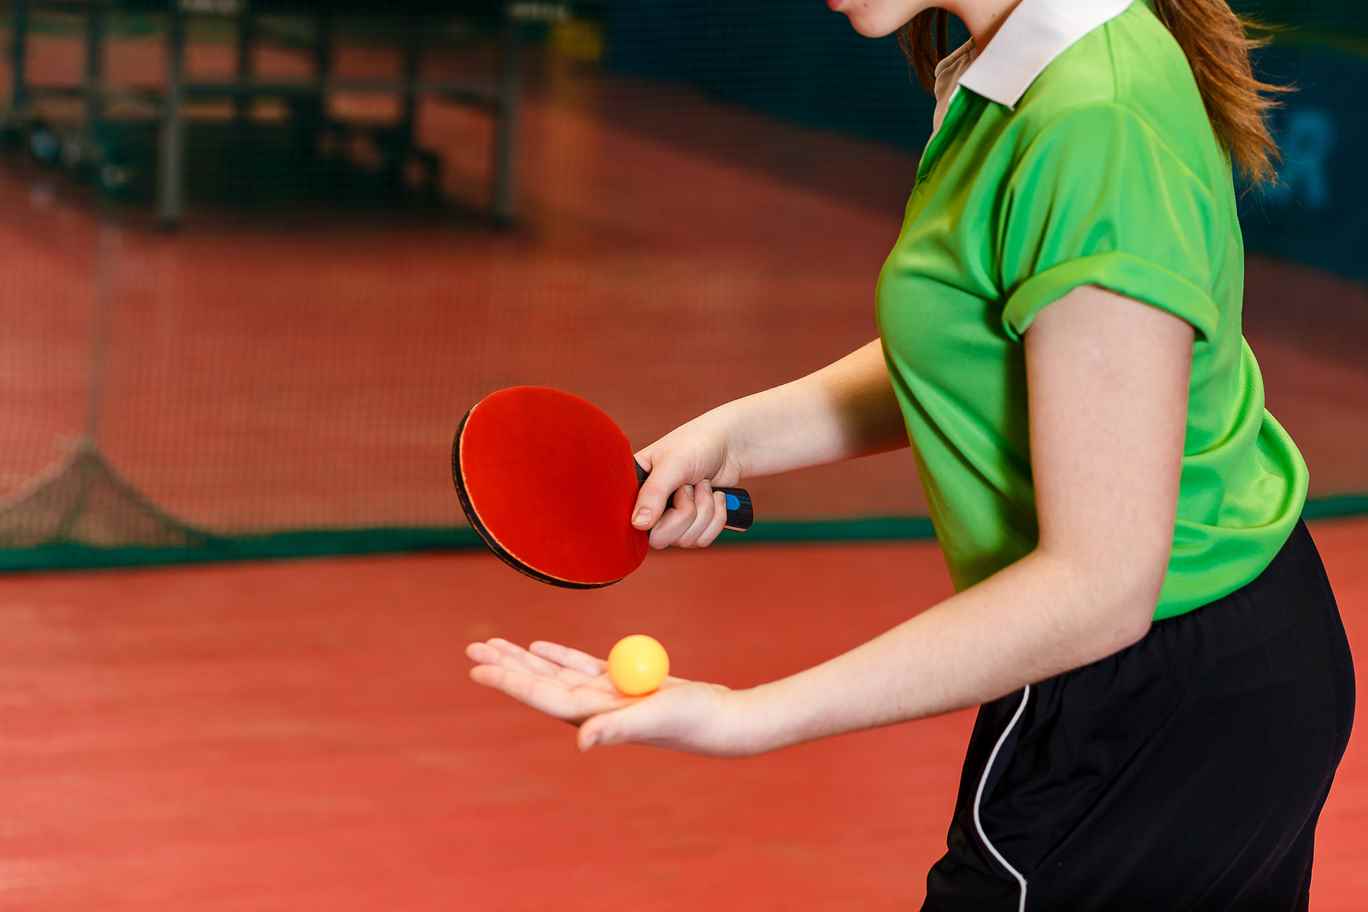 How to Upgrade Your Table Tennis Racket Based on Your Skills